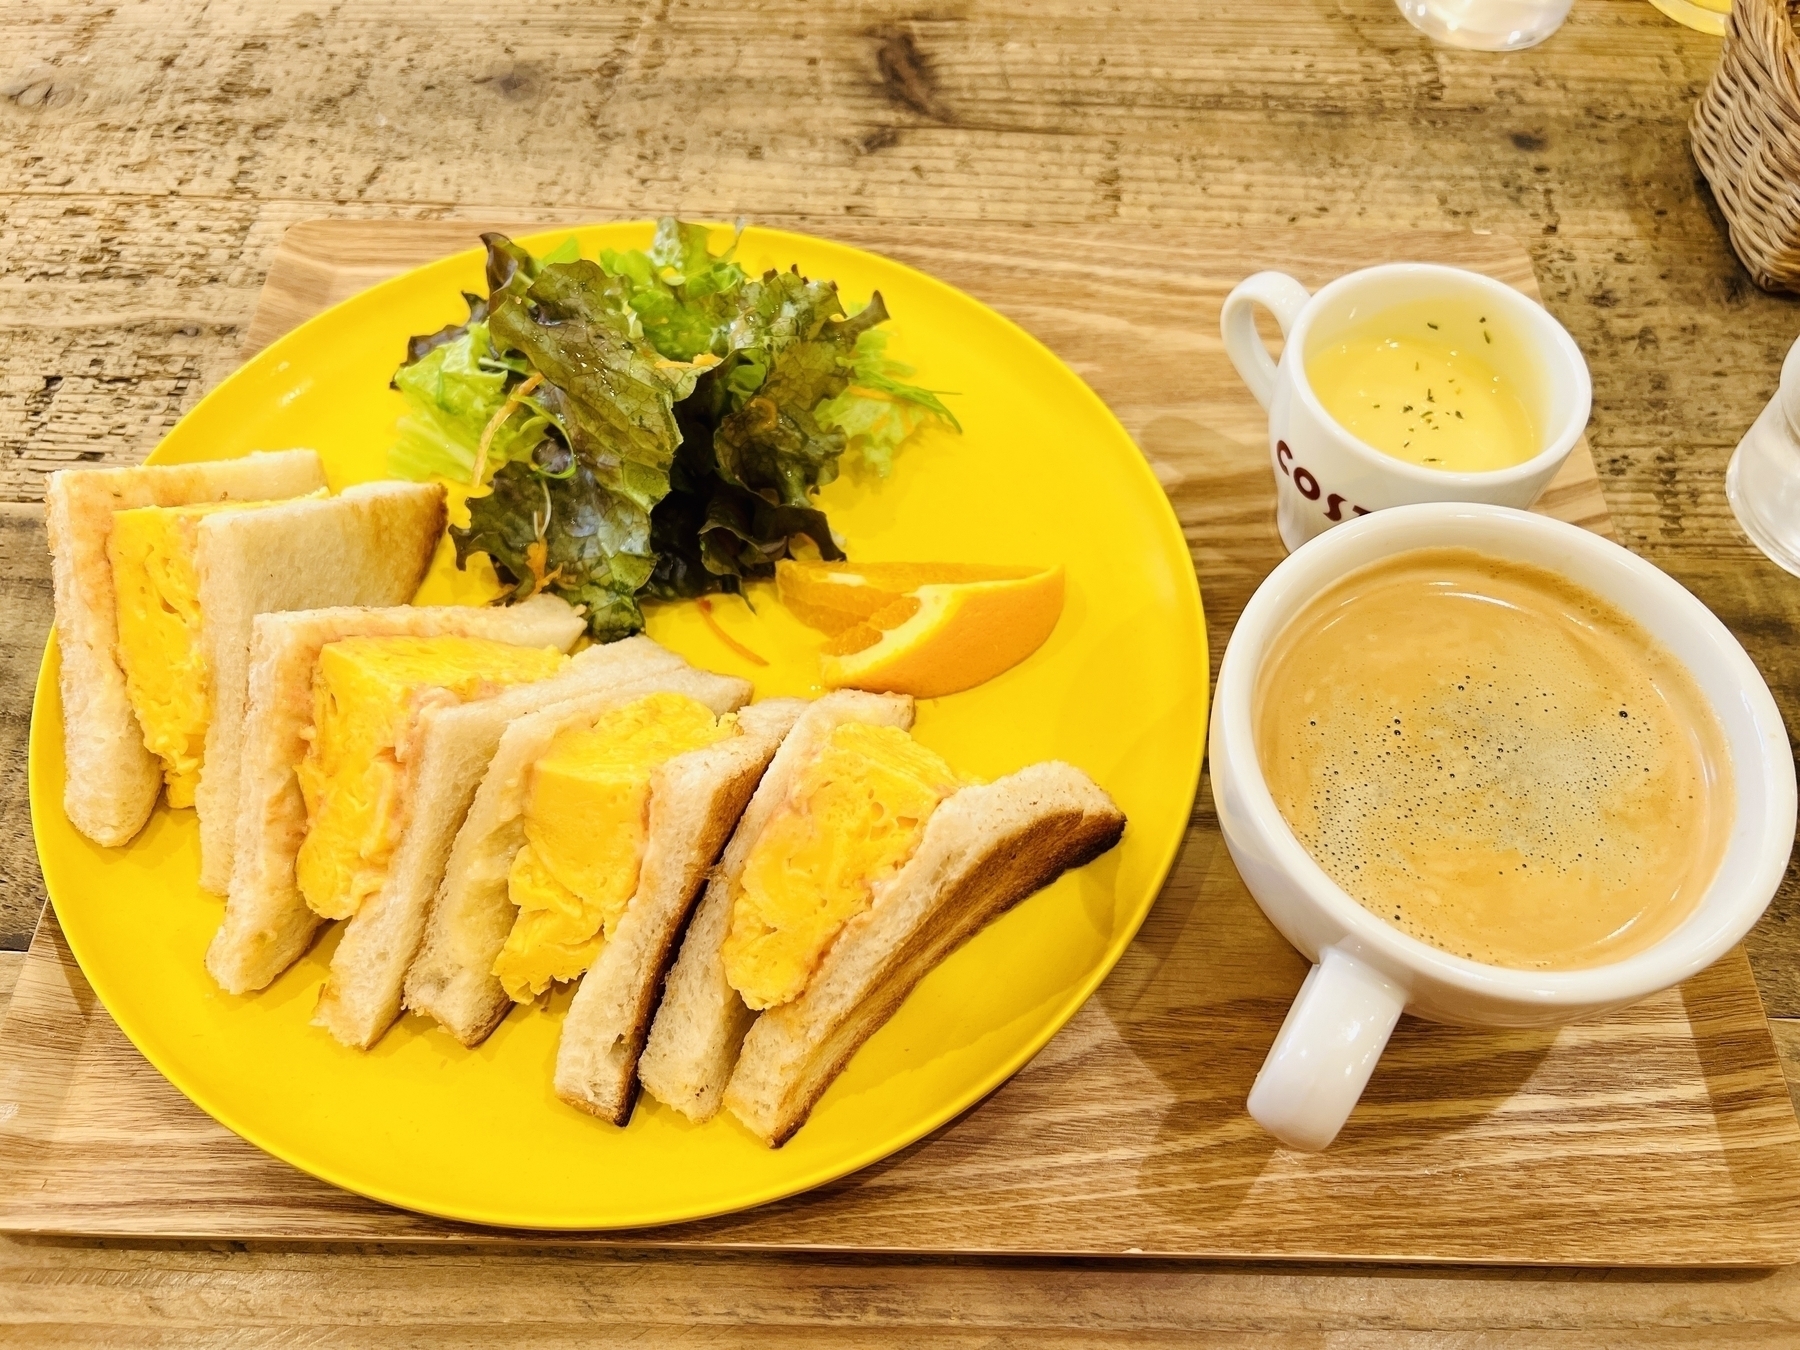 Yellow plate with egg sandwiches, green salad and an orange slice, beside is a cup of yellow corn soup, and a cup of coffee